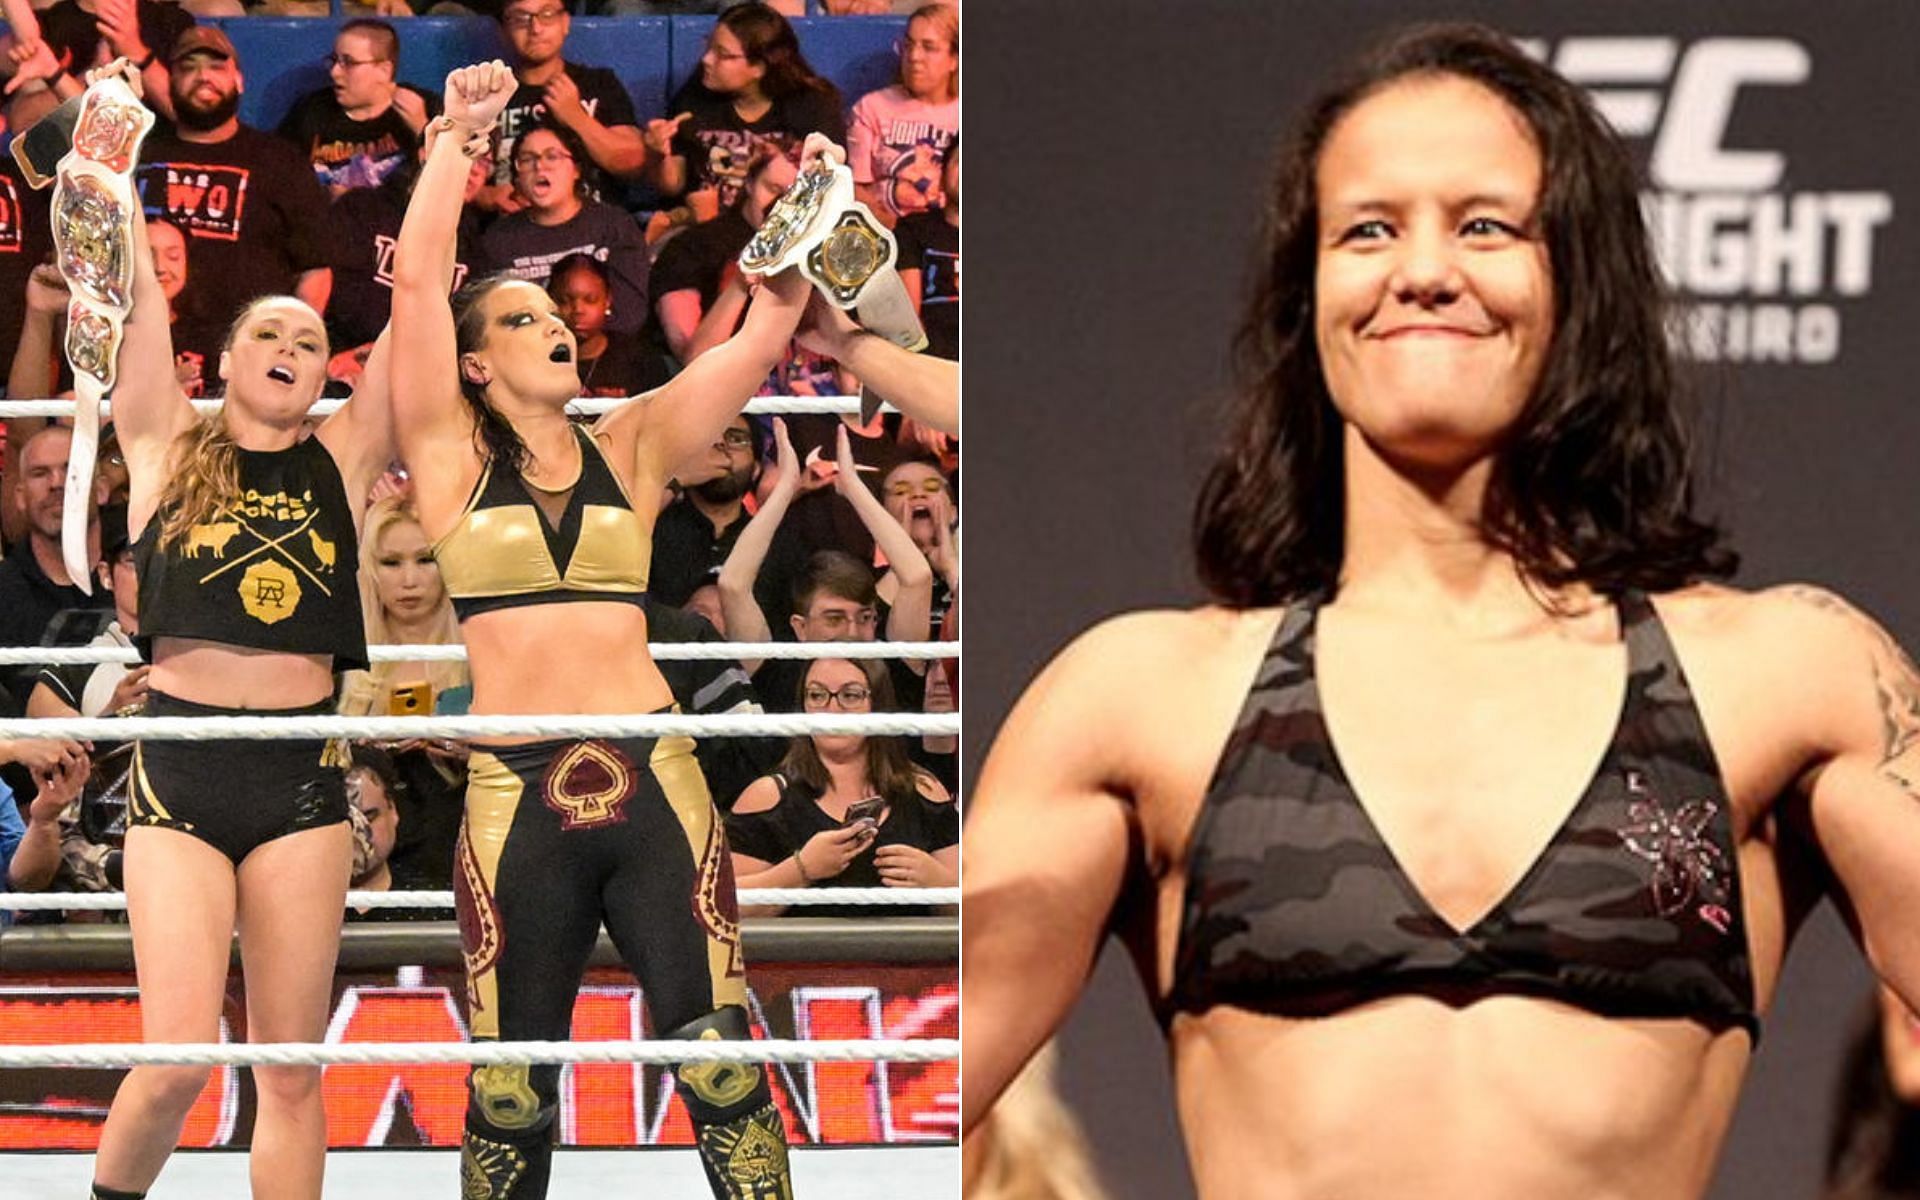 Ronda Rousey and Shayna Baszler [Left], and Shayna Baszler during UFC weigh-in [Right] [Photo credit: wwe.com, and @sherdogdotcom - Twitter]